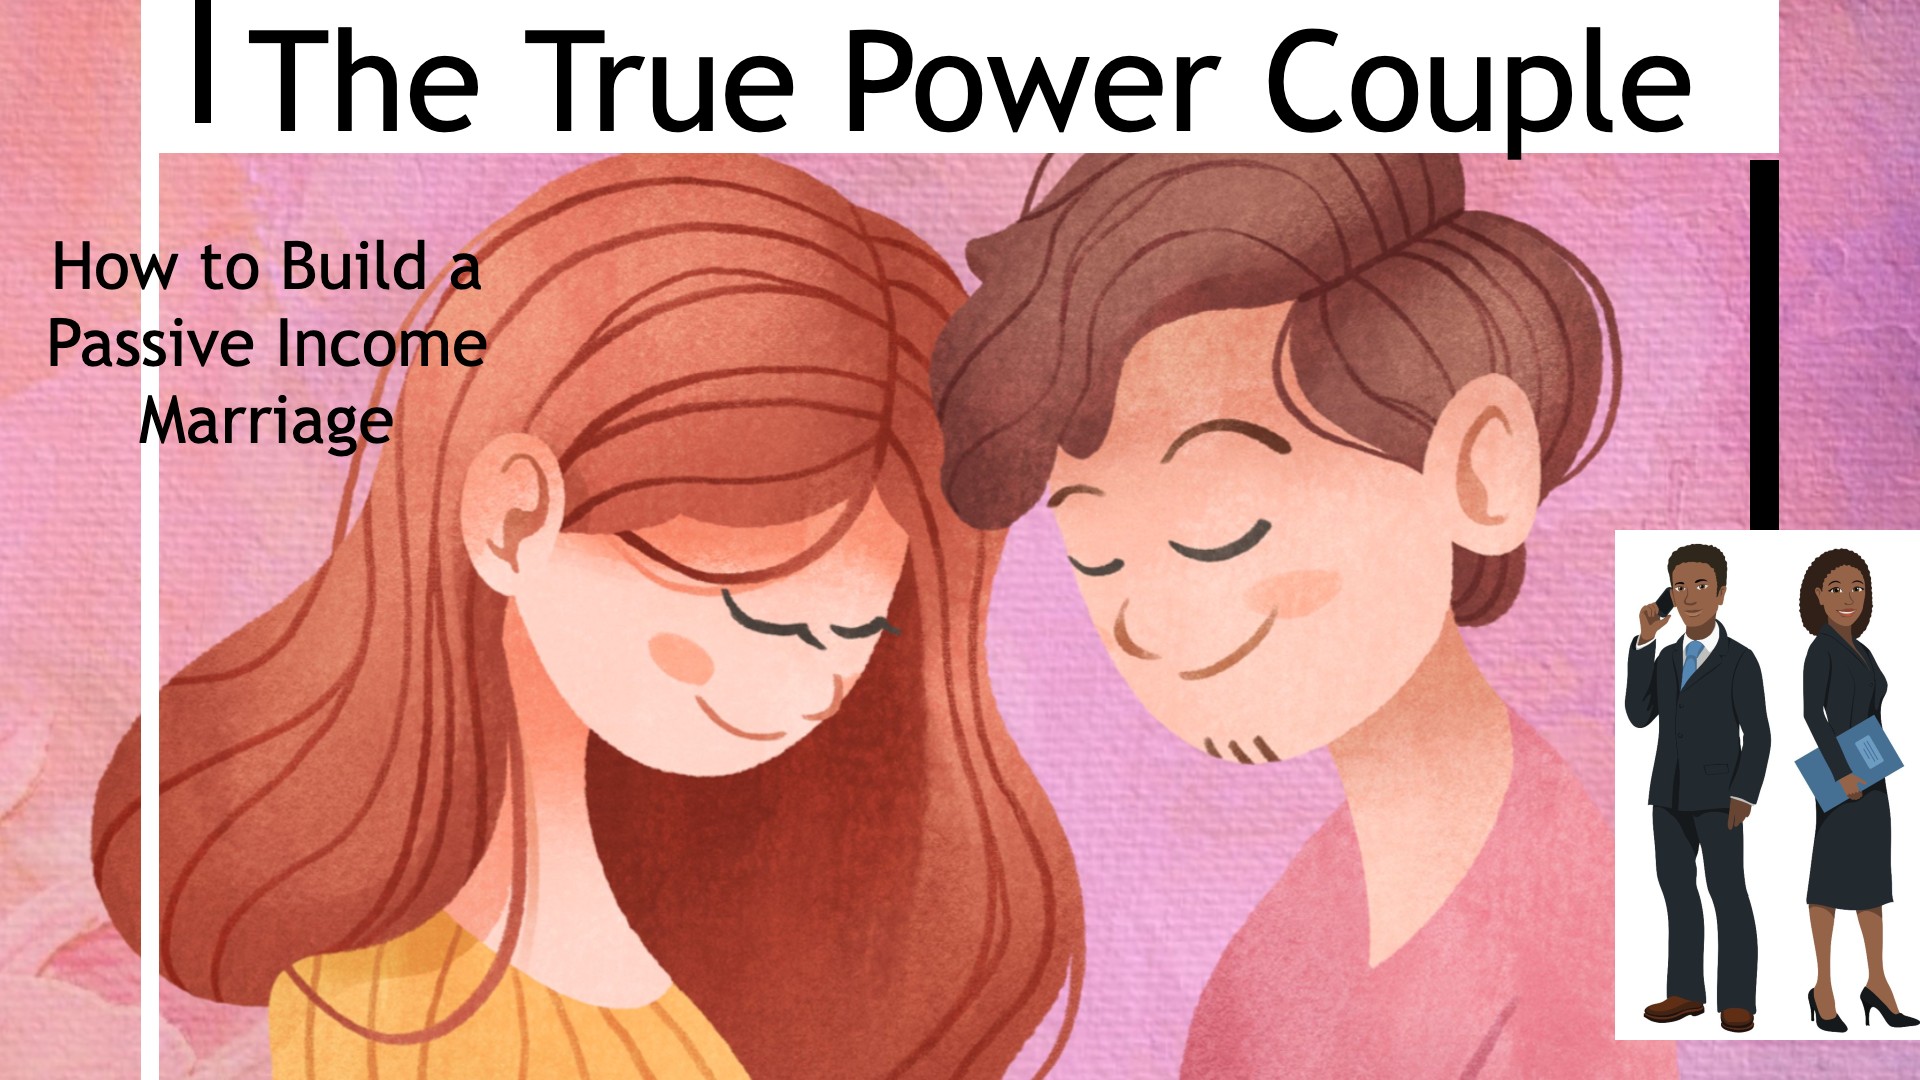 The True Power Couple: How to Build a Passive Income Marriage